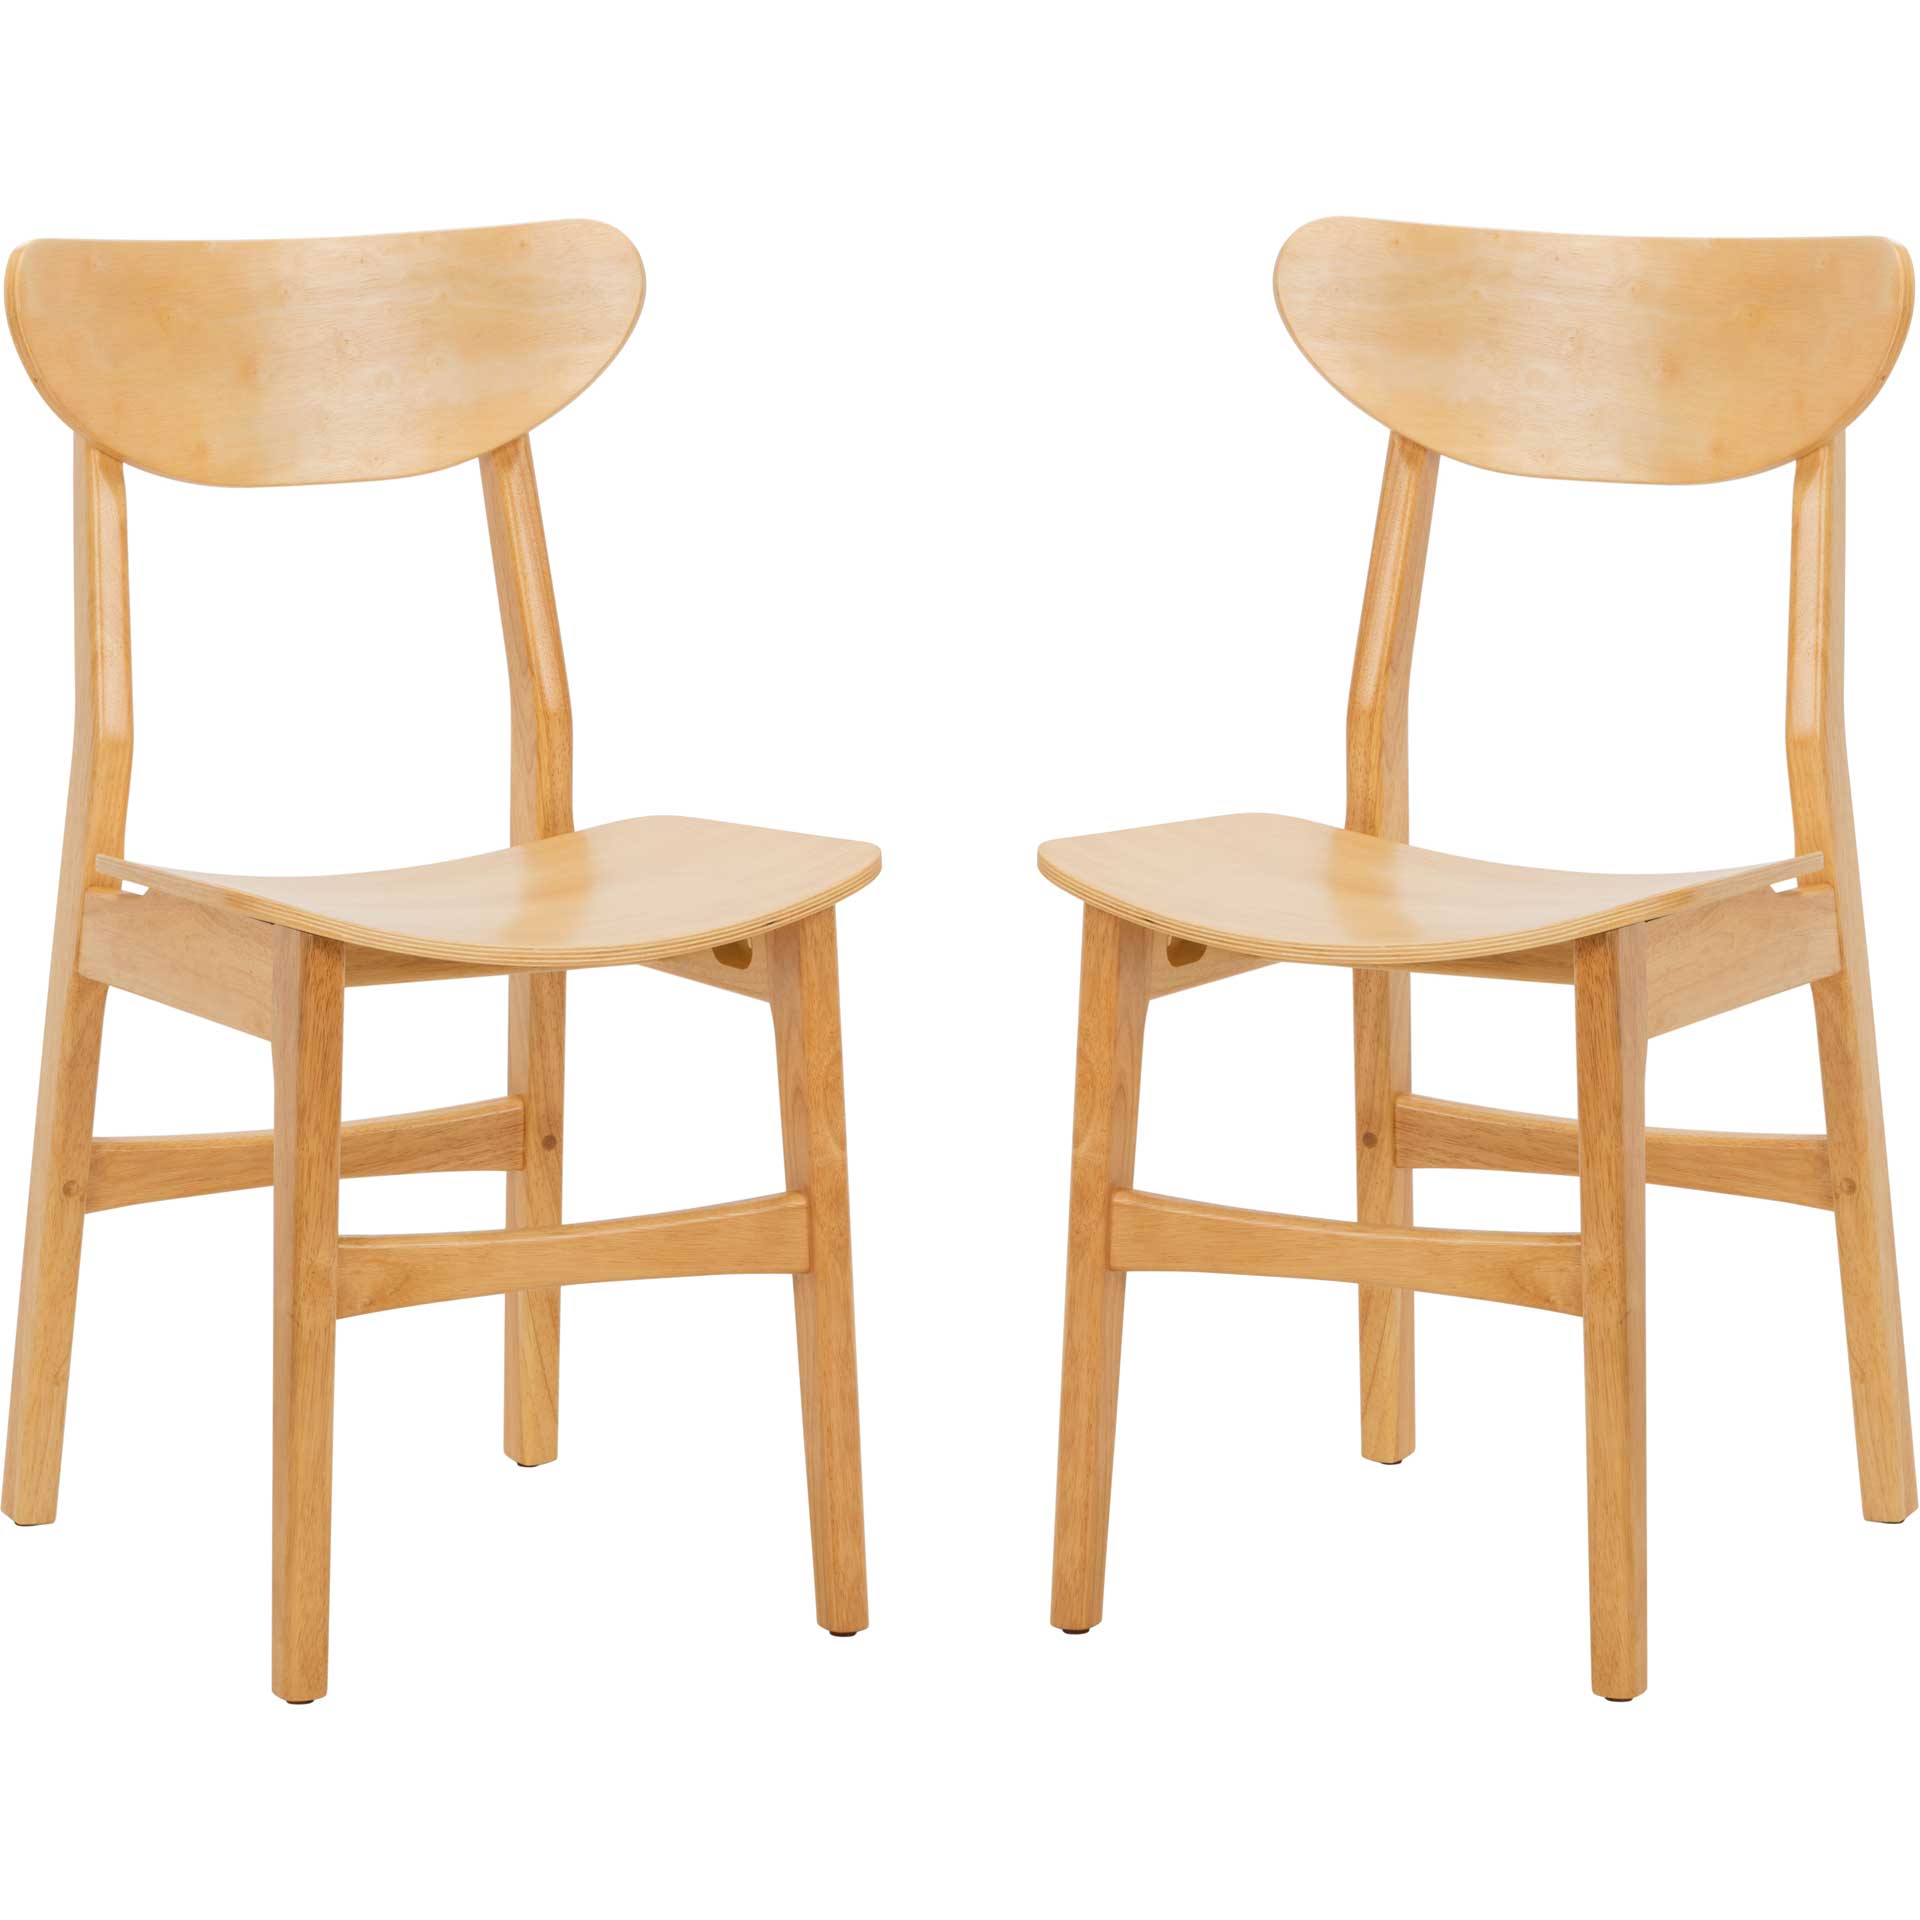 Lucas Retro Dining Chair Natural (Set of 2)